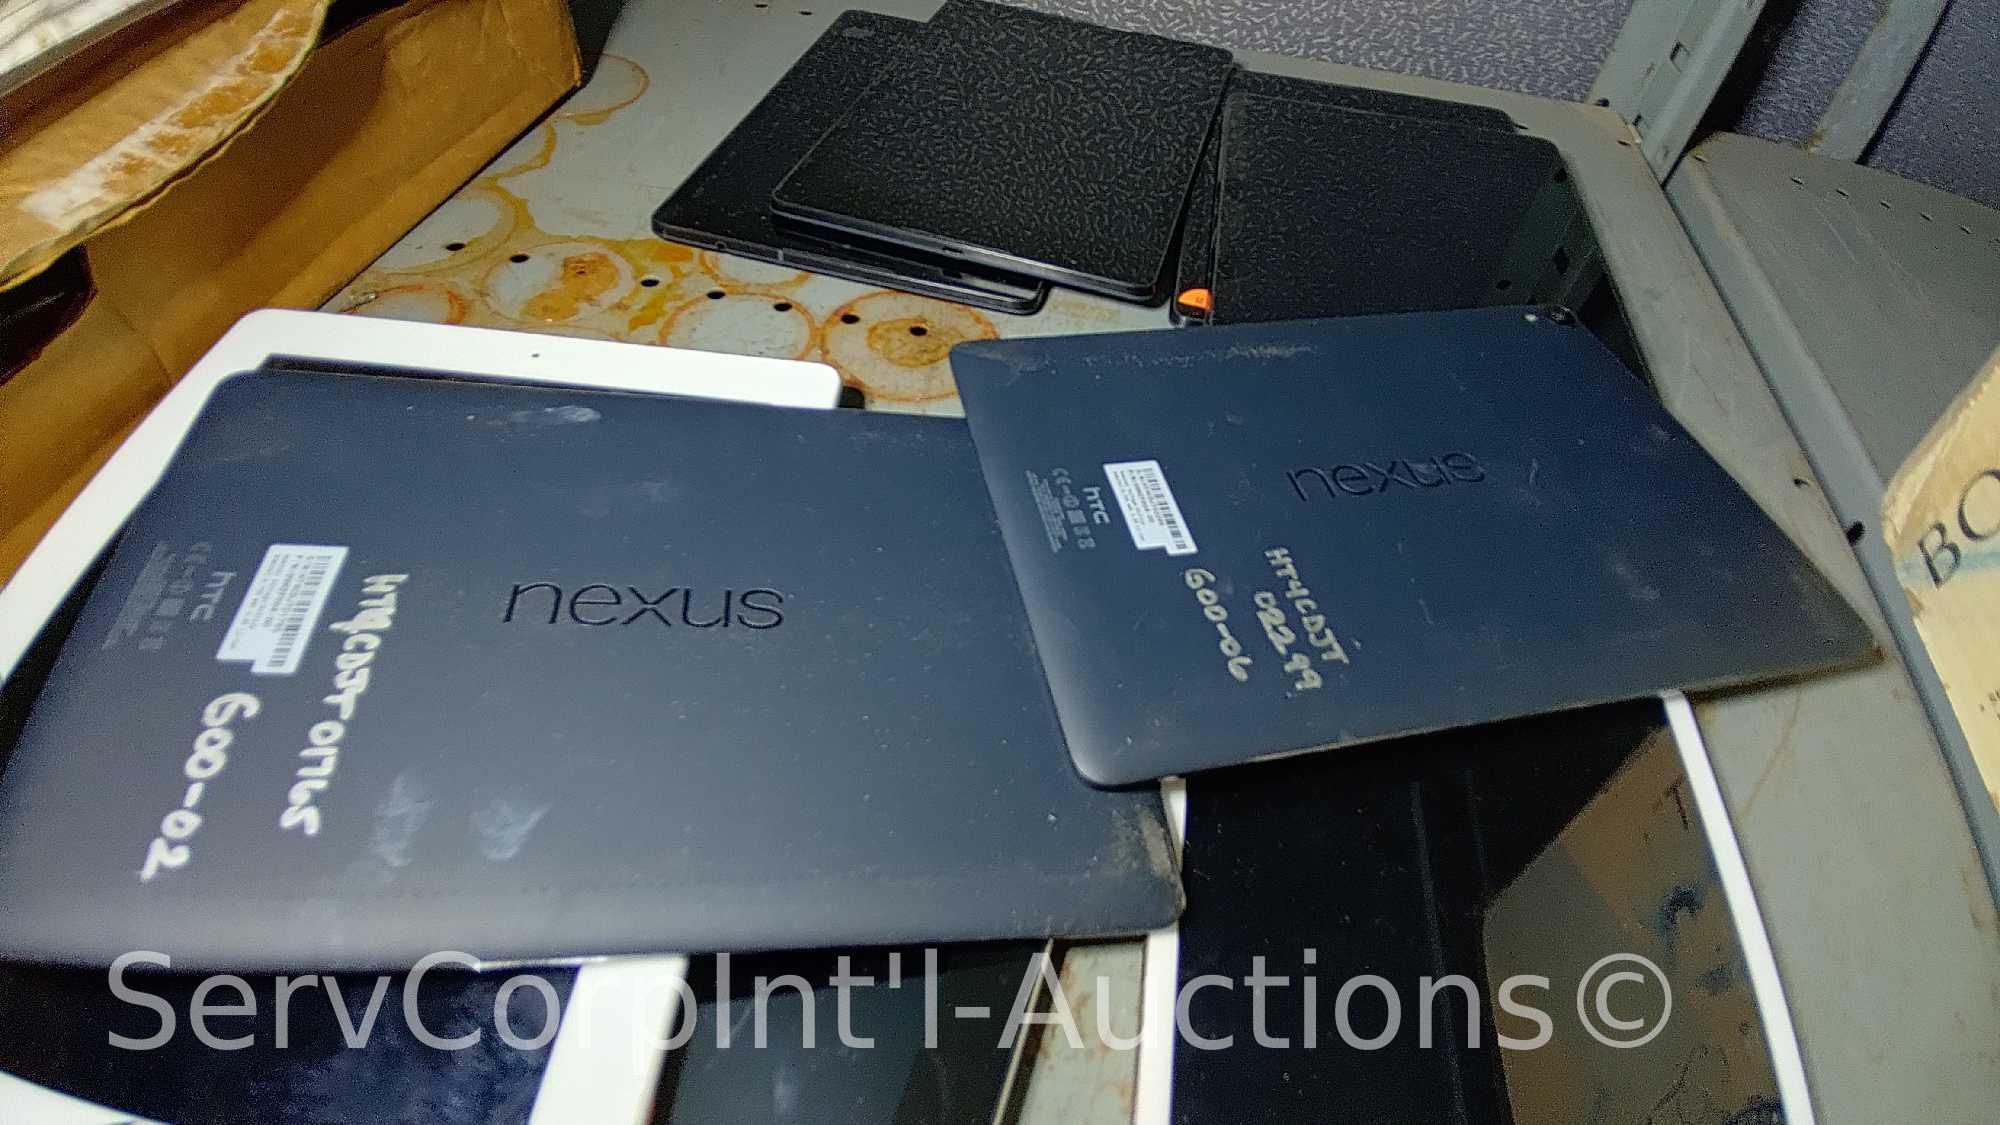 Lot on 2 Shelves Various i-Pad's & Nexus Tablets (may be locked and/or have cracked screens), Signed